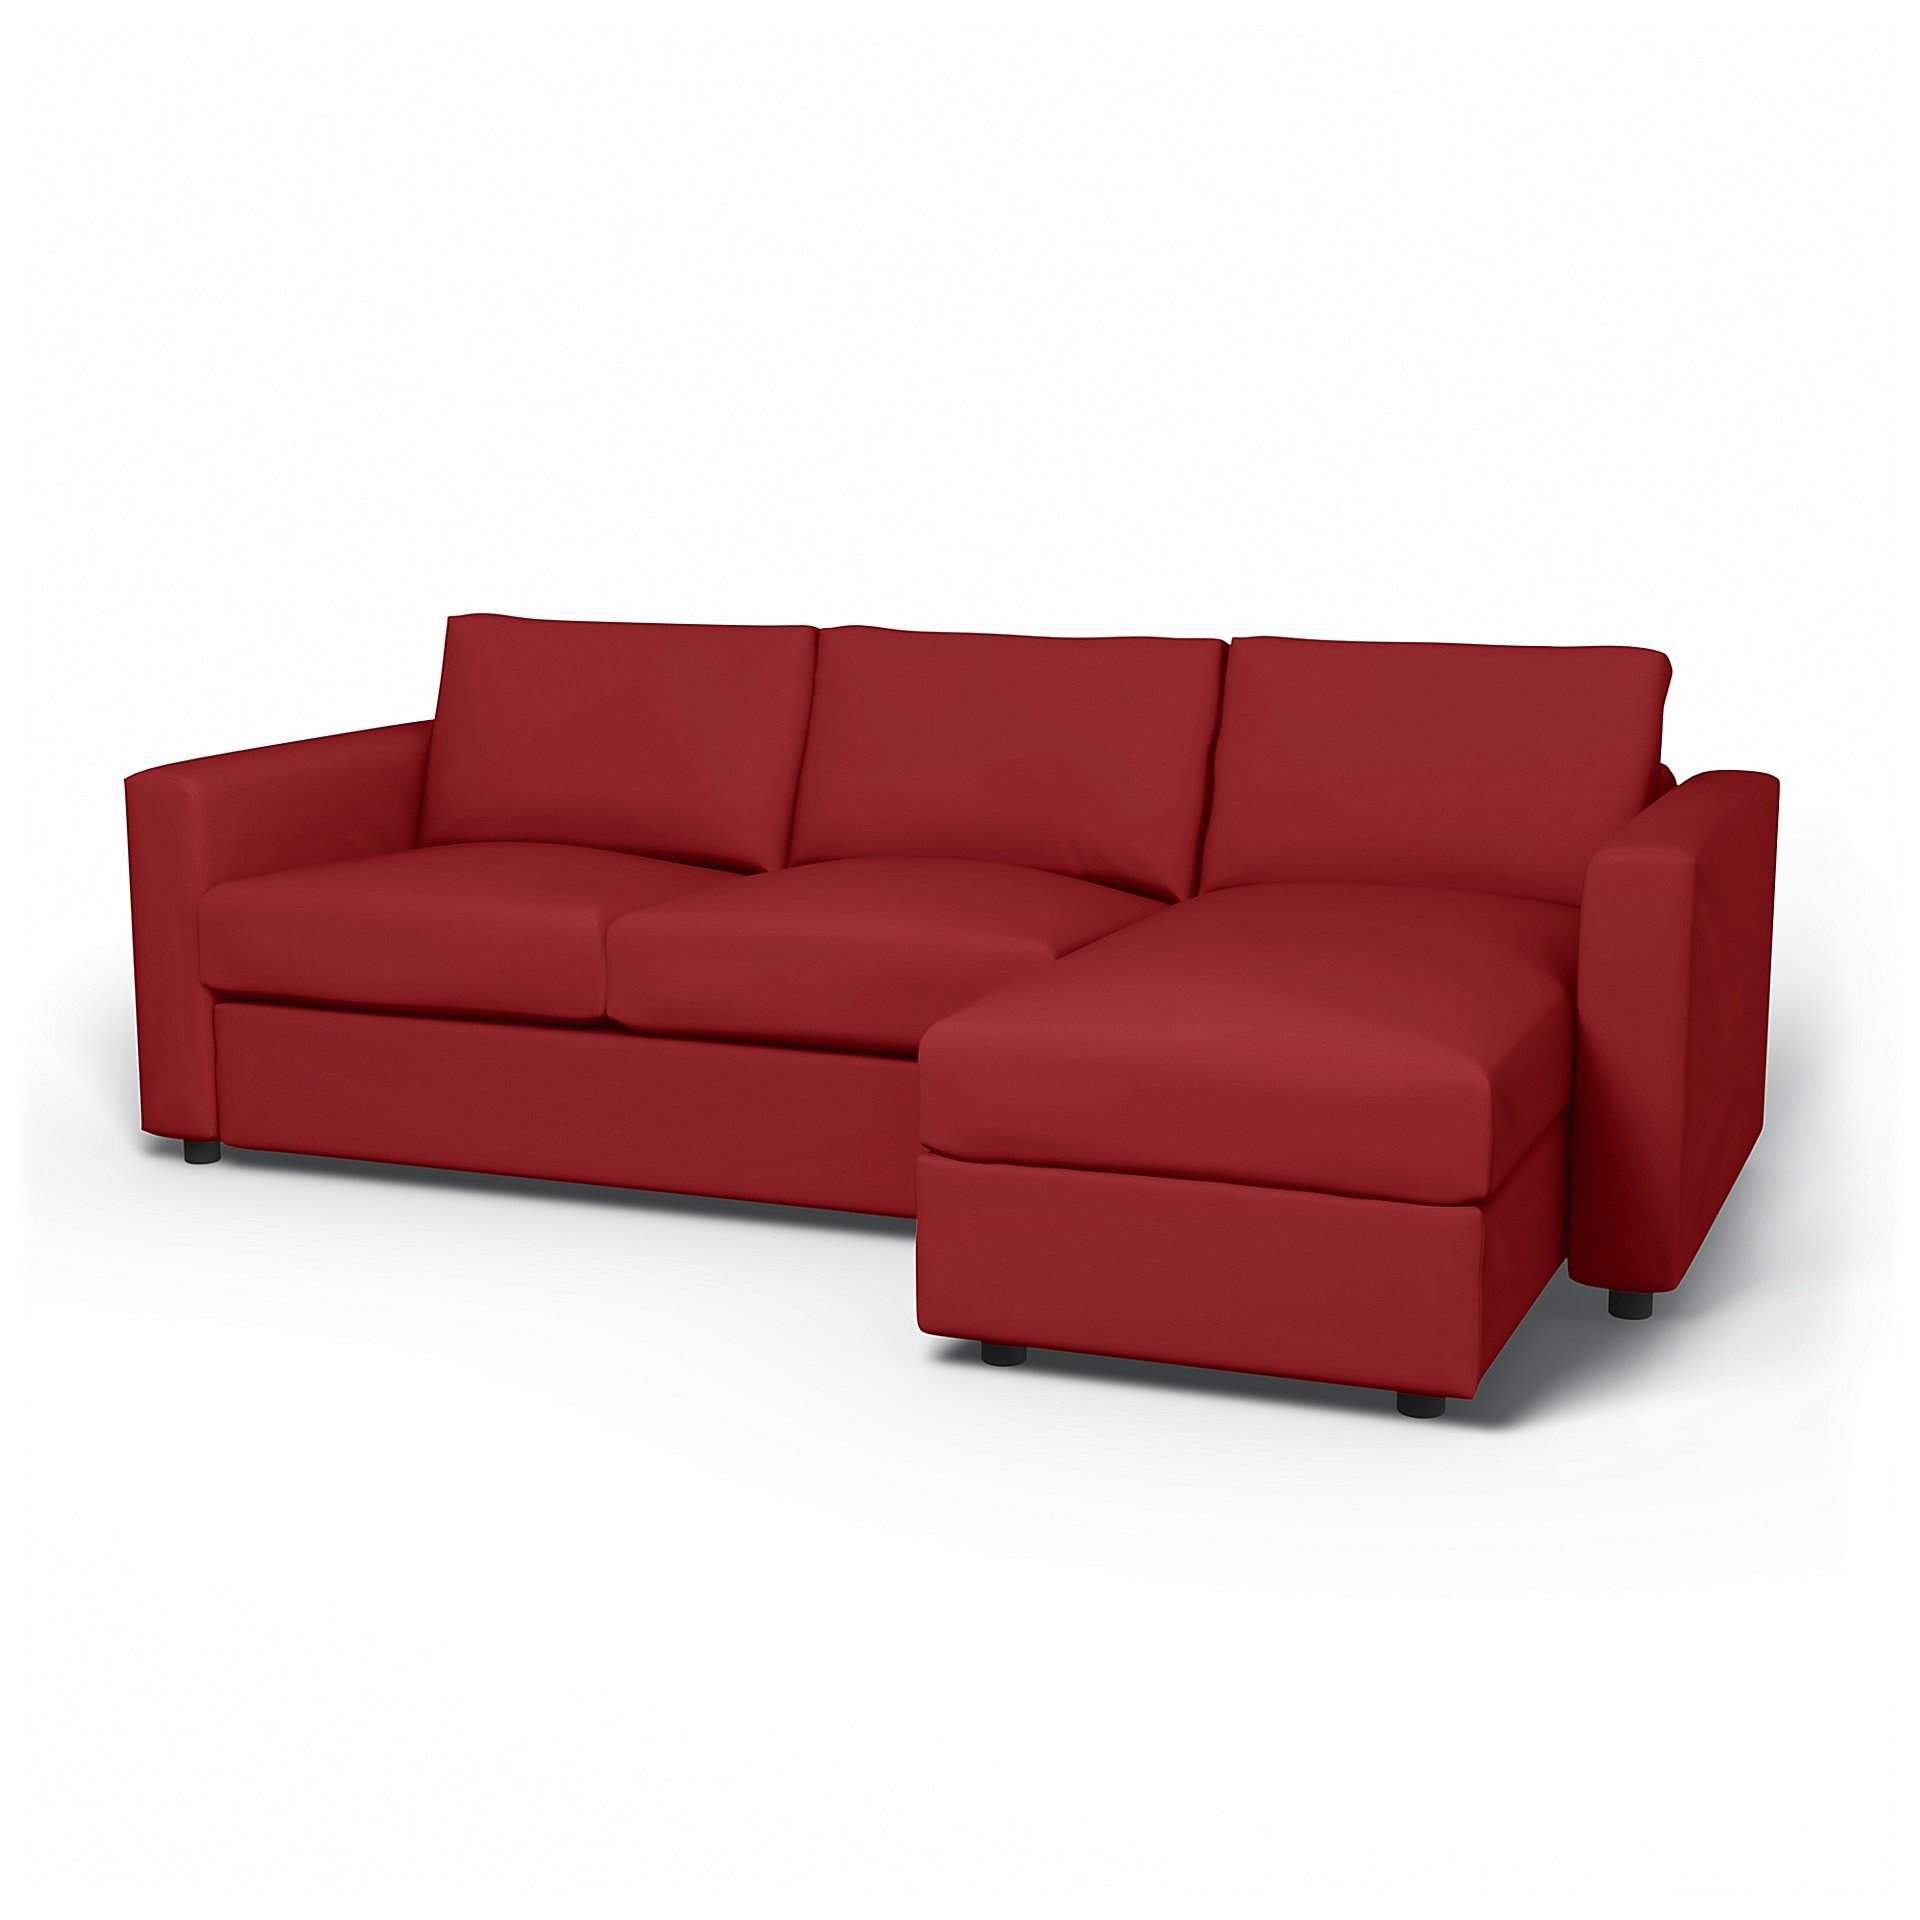 IKEA - Vimle 2 Seater Sofa with Chaise Cover, Scarlet Red, Cotton - Bemz